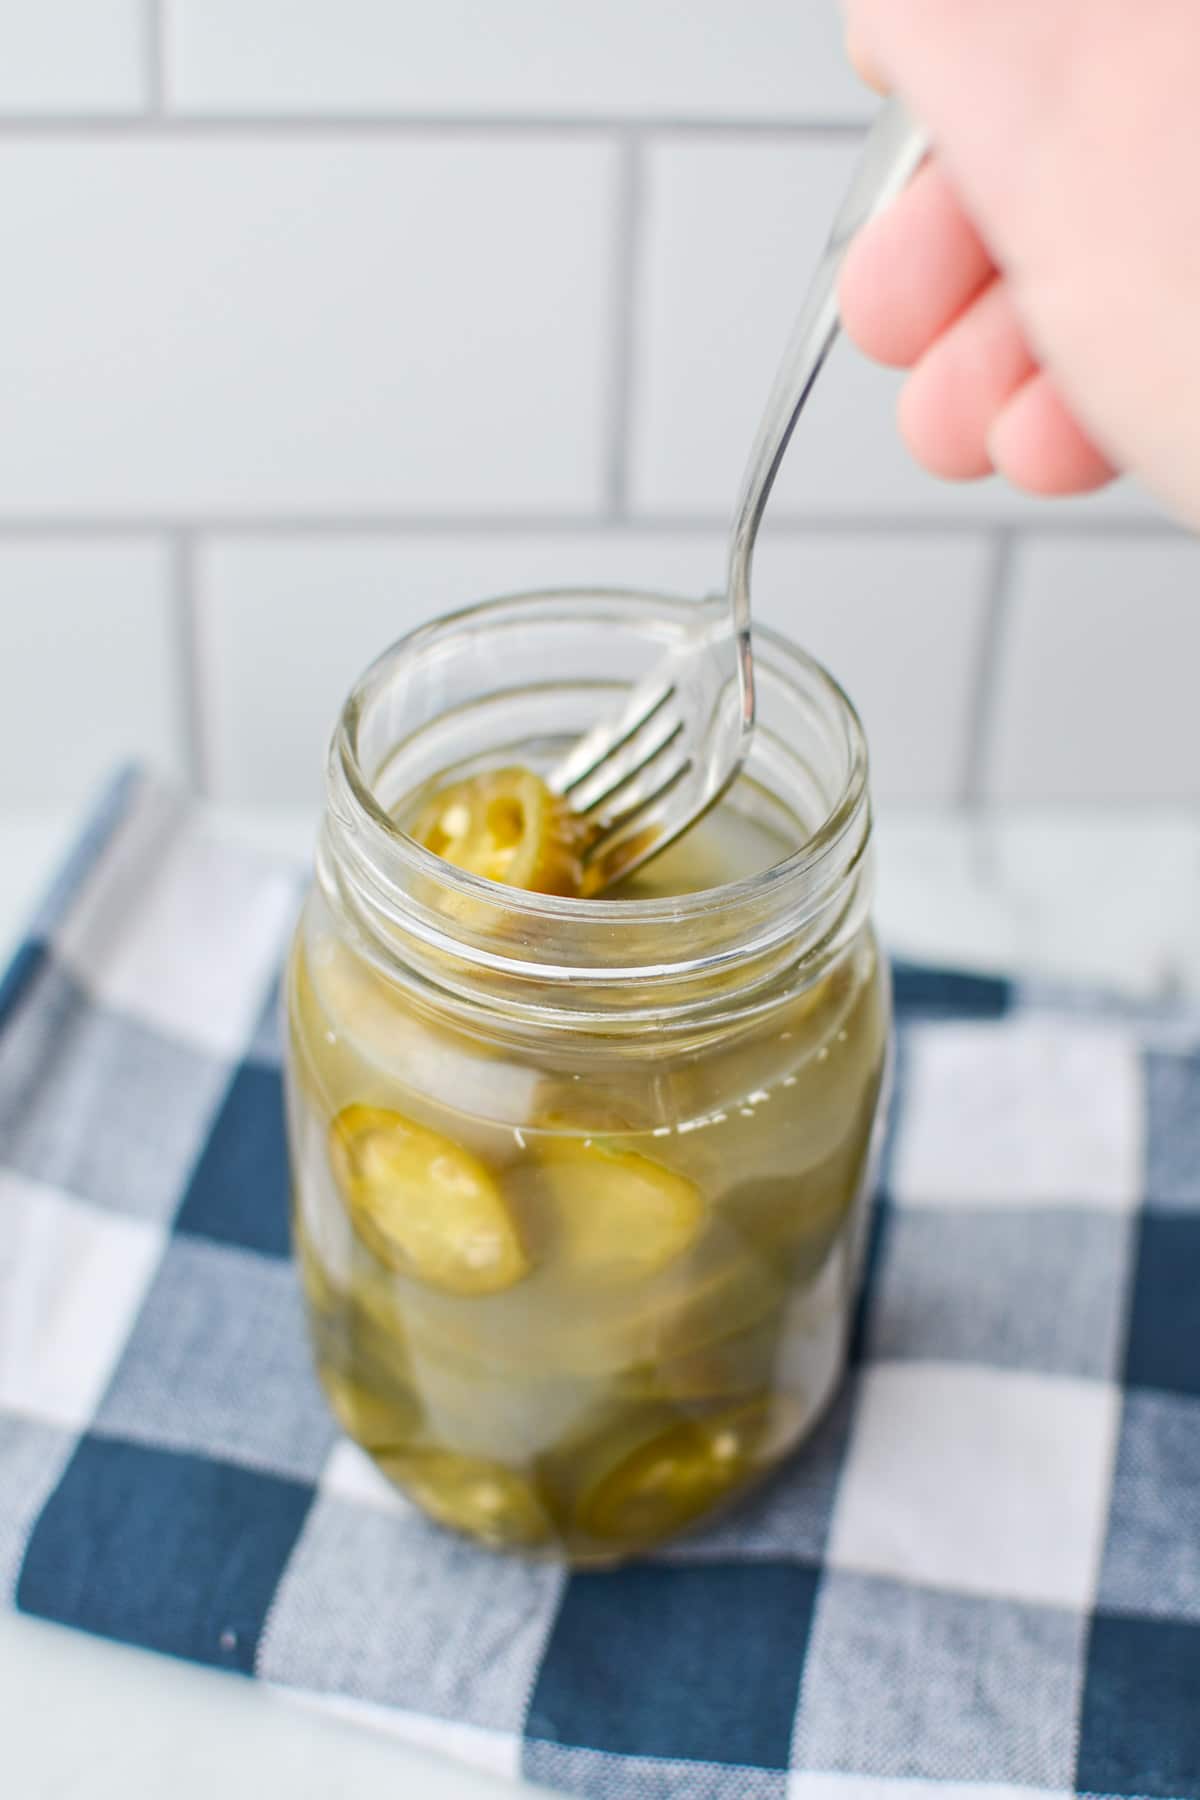 A jar of fermented jalapenos on a blue check cloth; a hand using a fork to remove a ring.